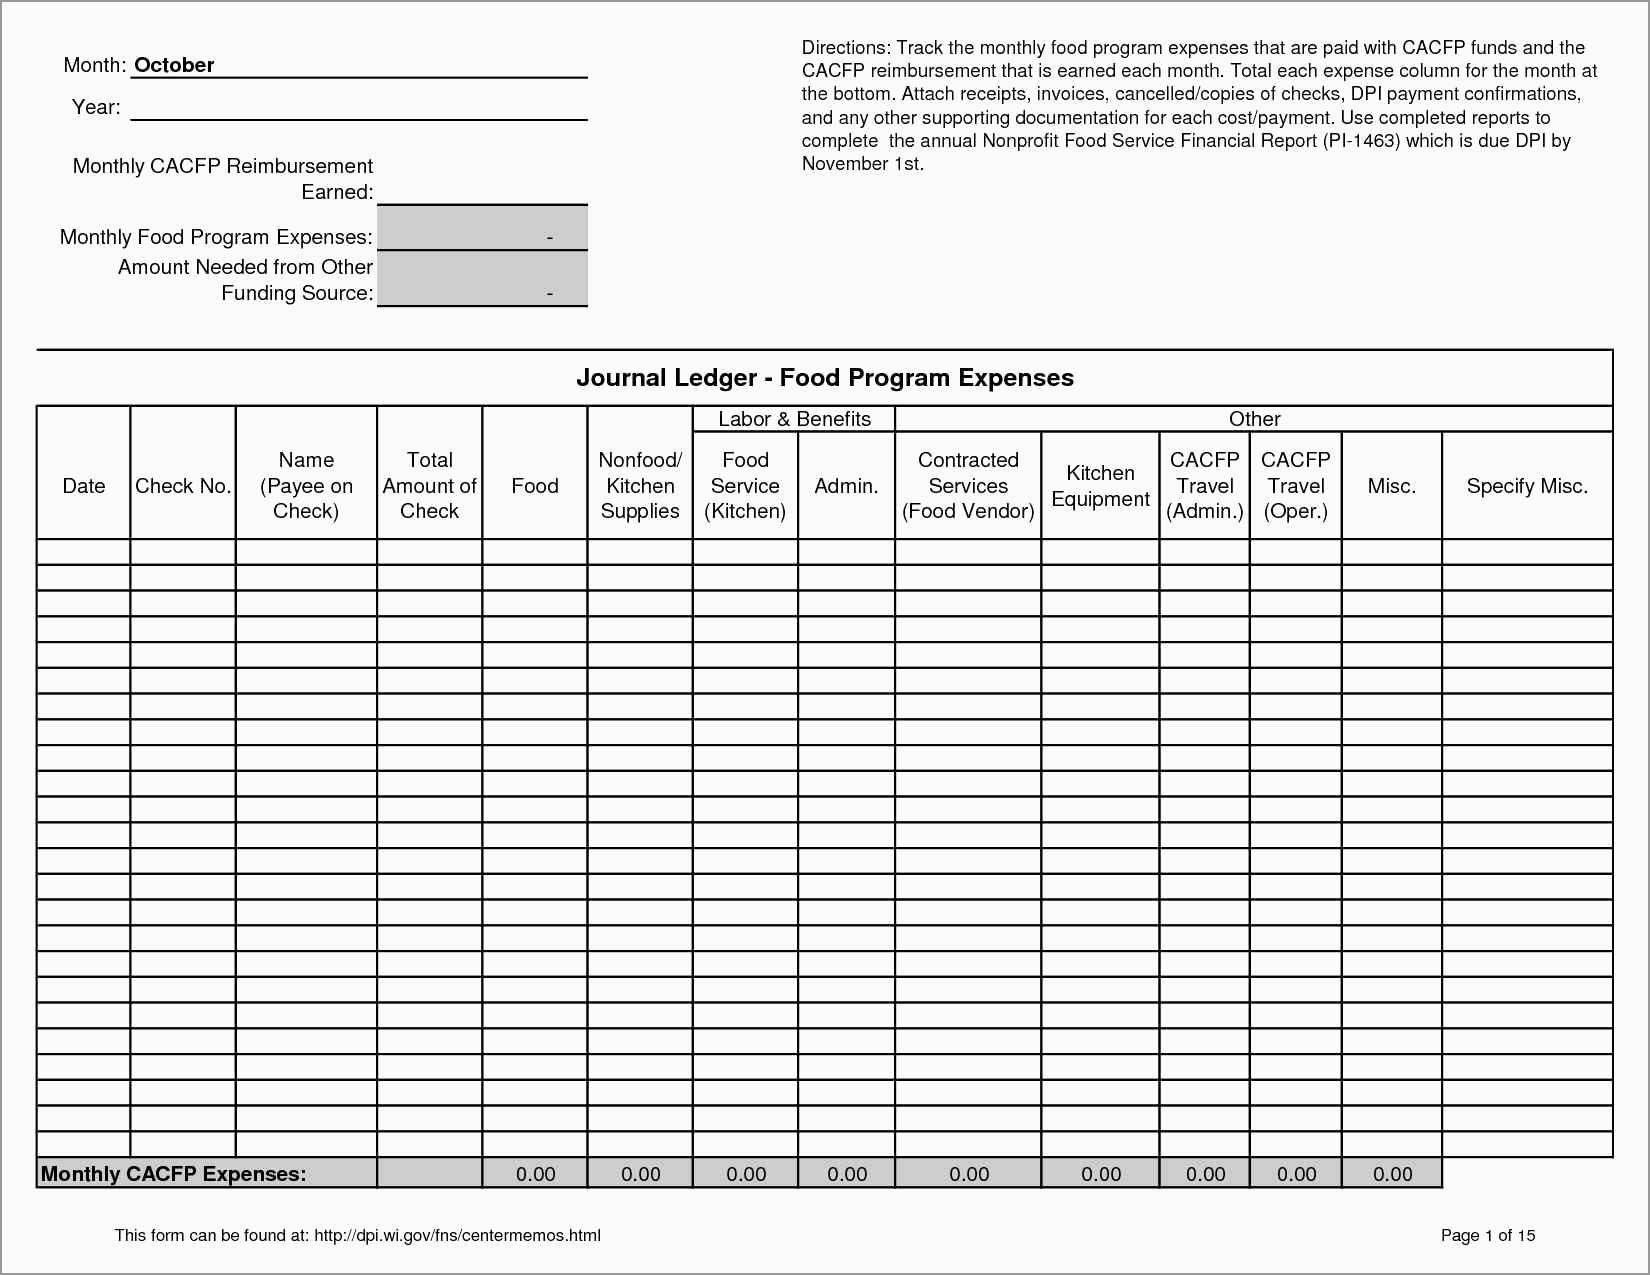 Best Of Business Ledger Template Excel Free  Best Of Template throughout Business Ledger Template Excel Free